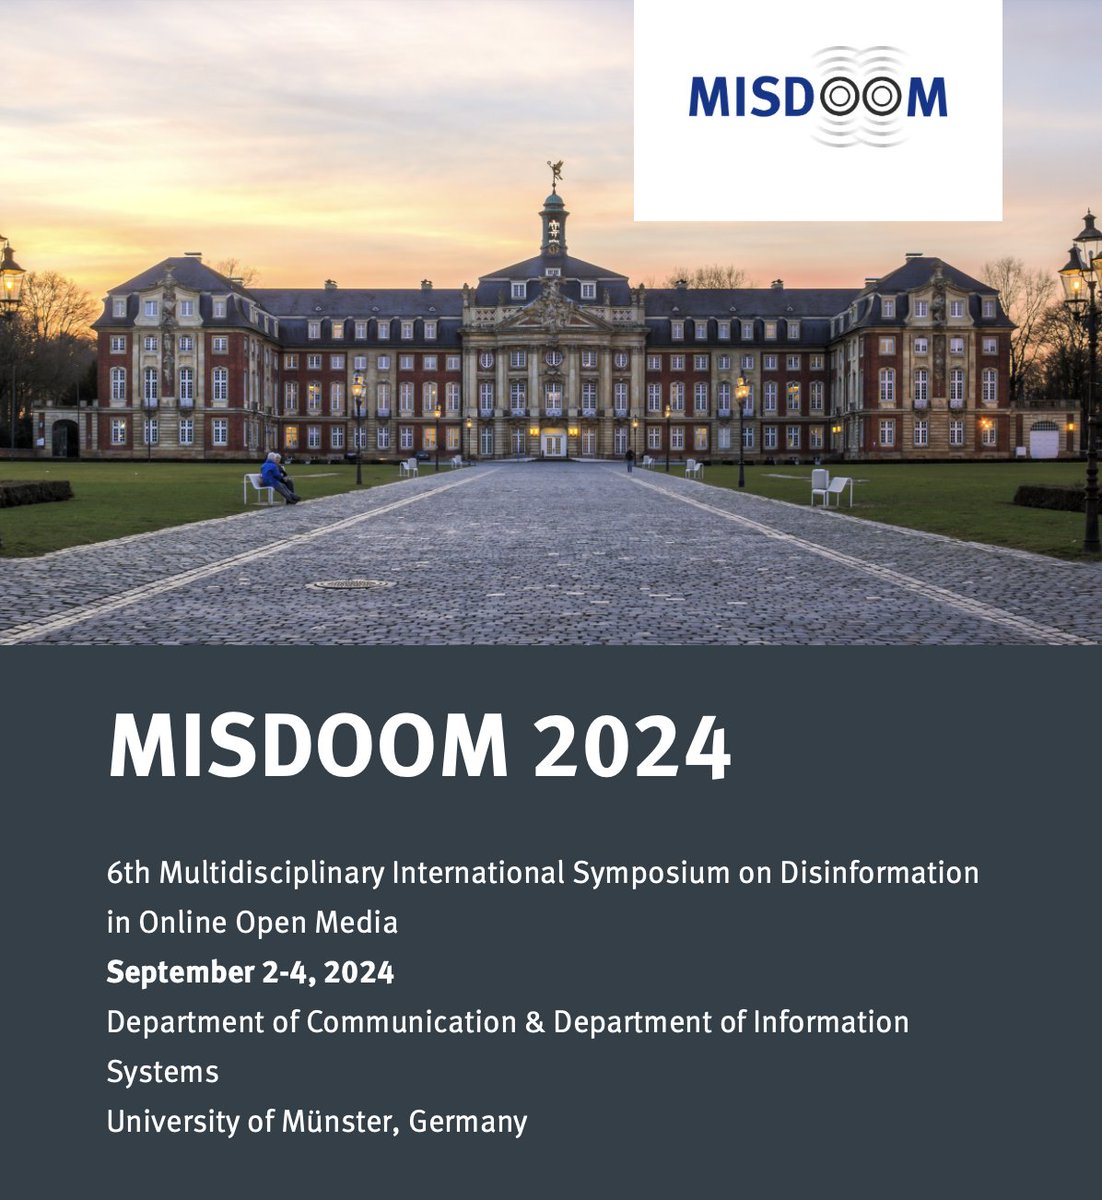 The website and call for the 6th international #Misdoom conference on #disinformation research is out. Info website: misdoom2024.uni-muenster.de Our social media channels: x.com/misdoom bsky.app/profile/misdoo… Submit your papers & CU at @uni_muenster in fall!